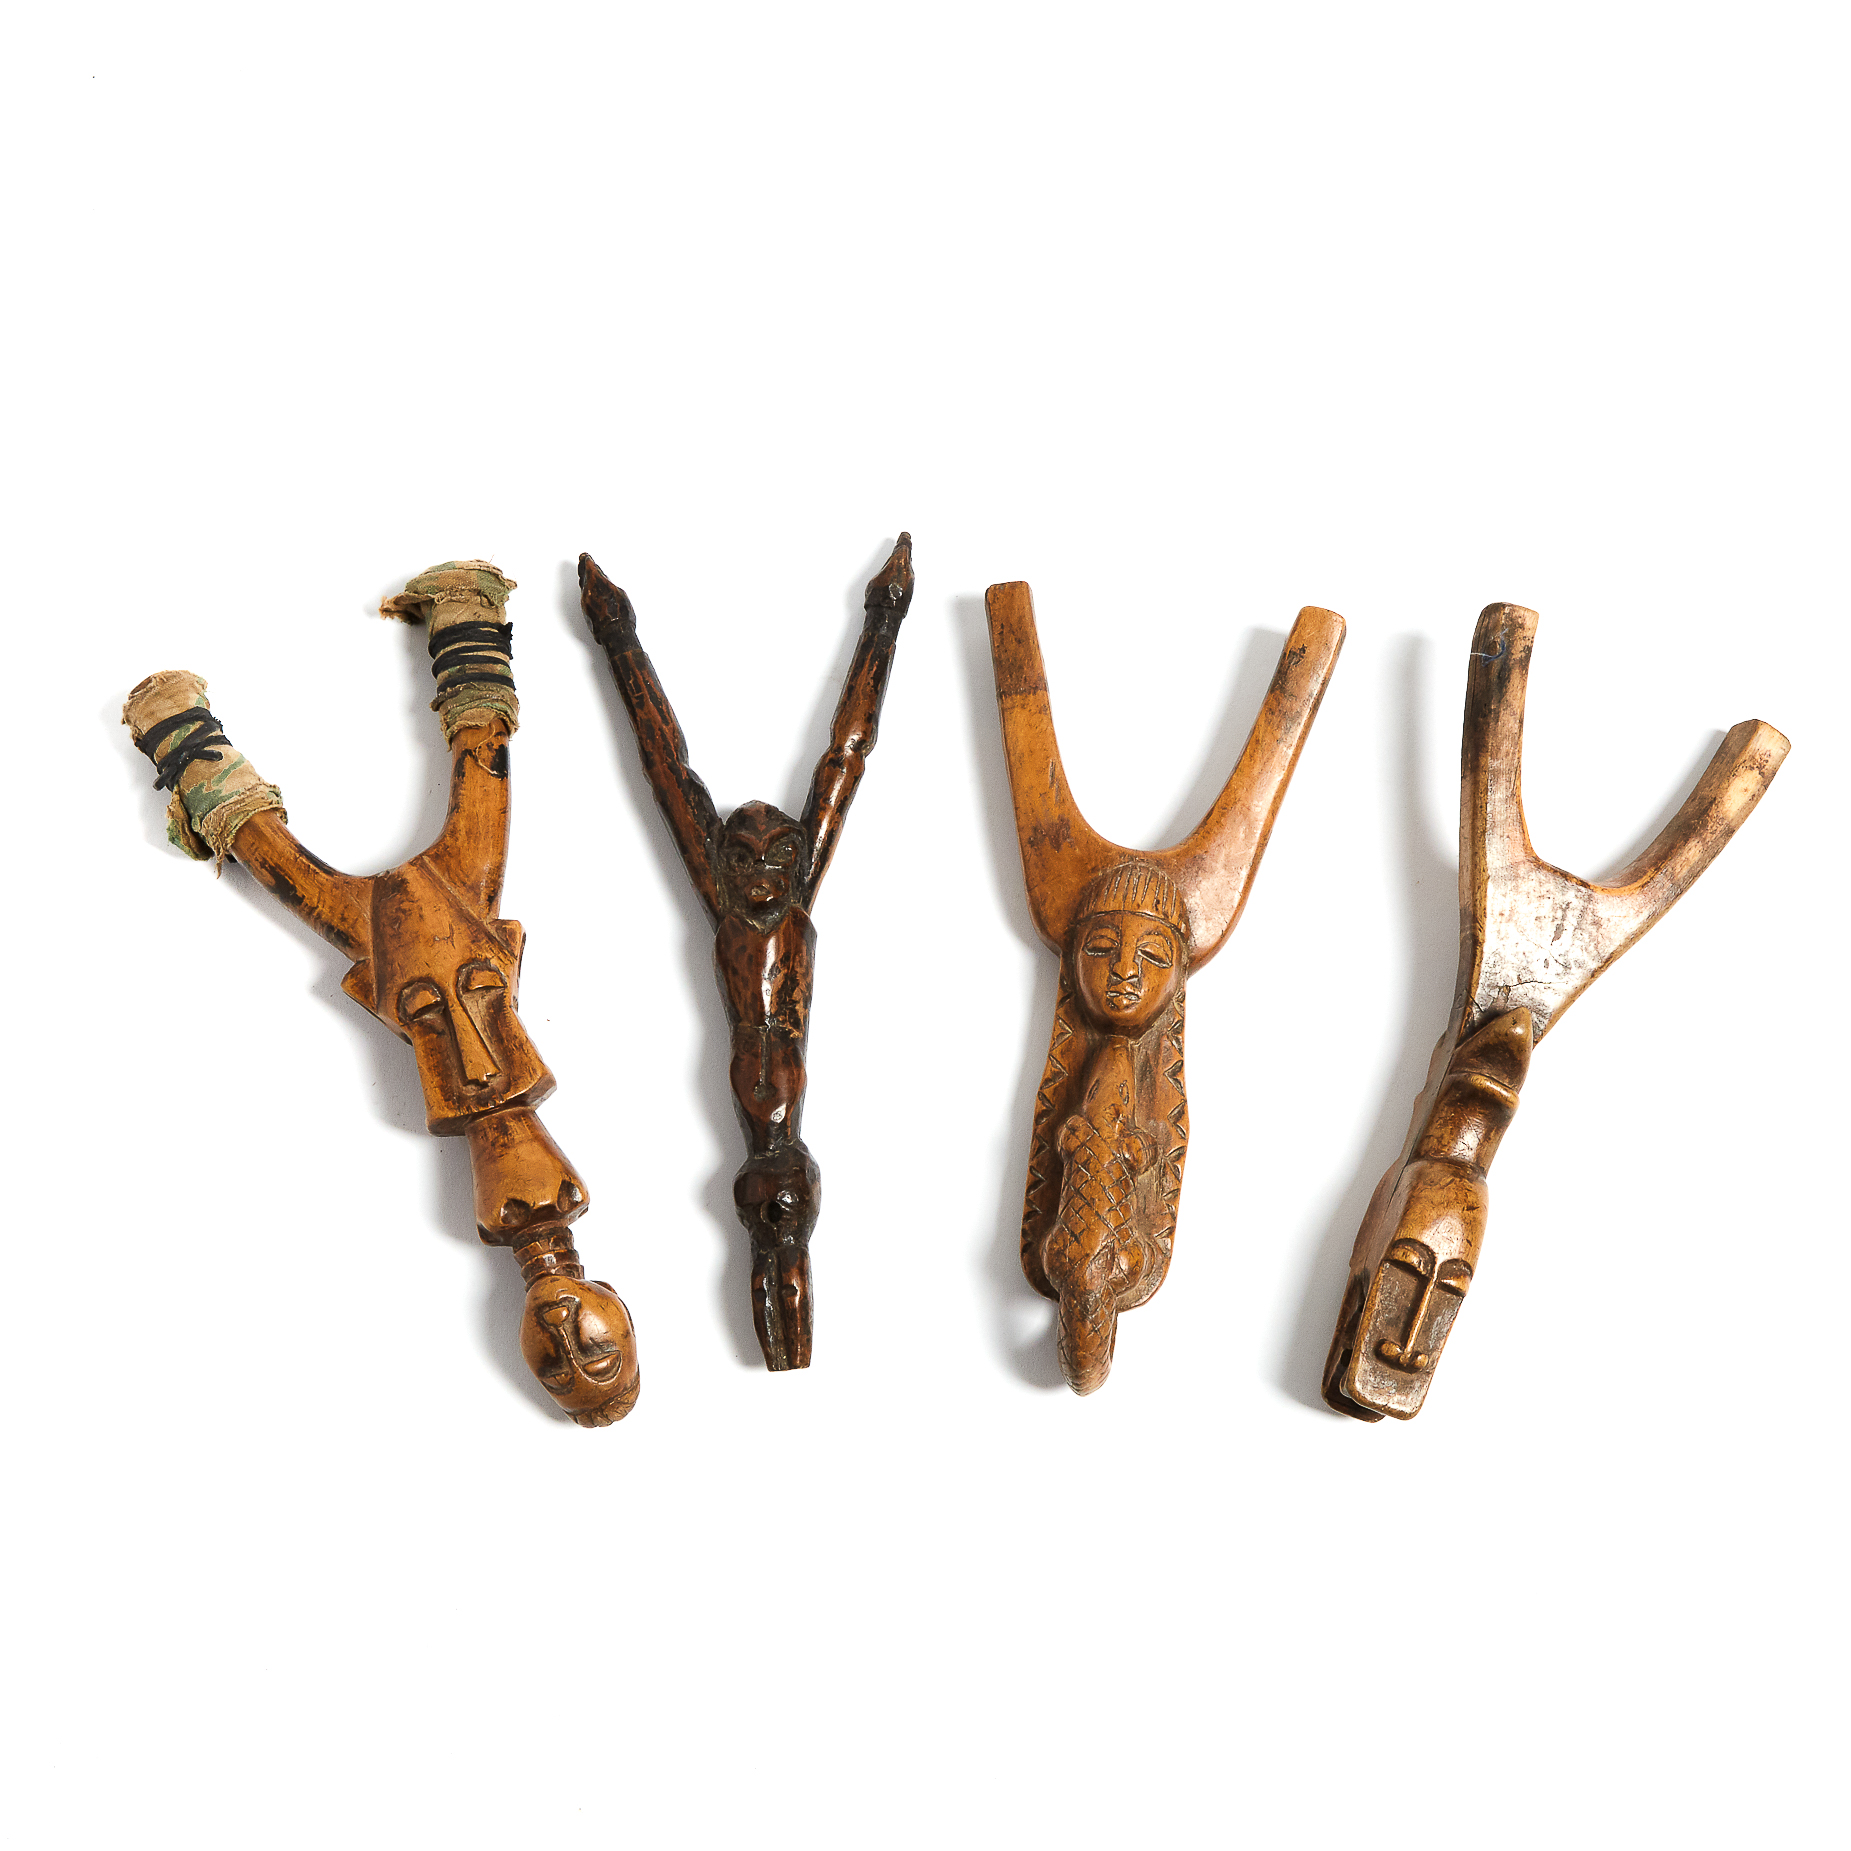 Group of Four African Carved Wood Anthropo-zoomorphic Slingshots